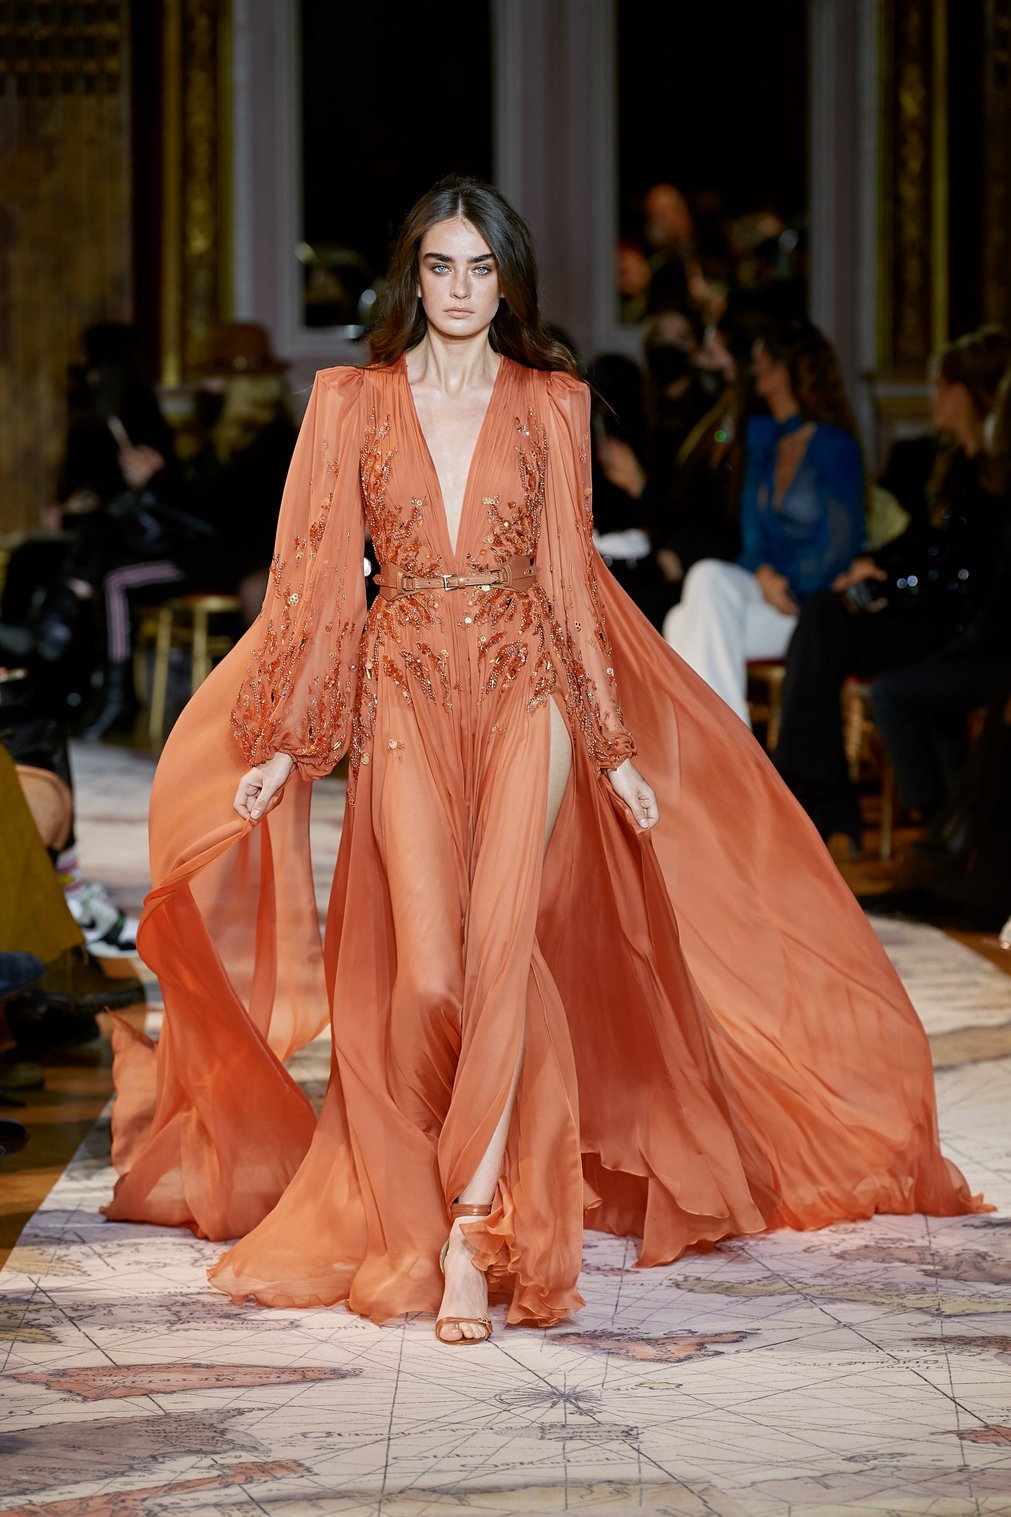 Image may contain Clothing Apparel Human Person Fashion Evening Dress Gown Robe and Andreea Diaconu